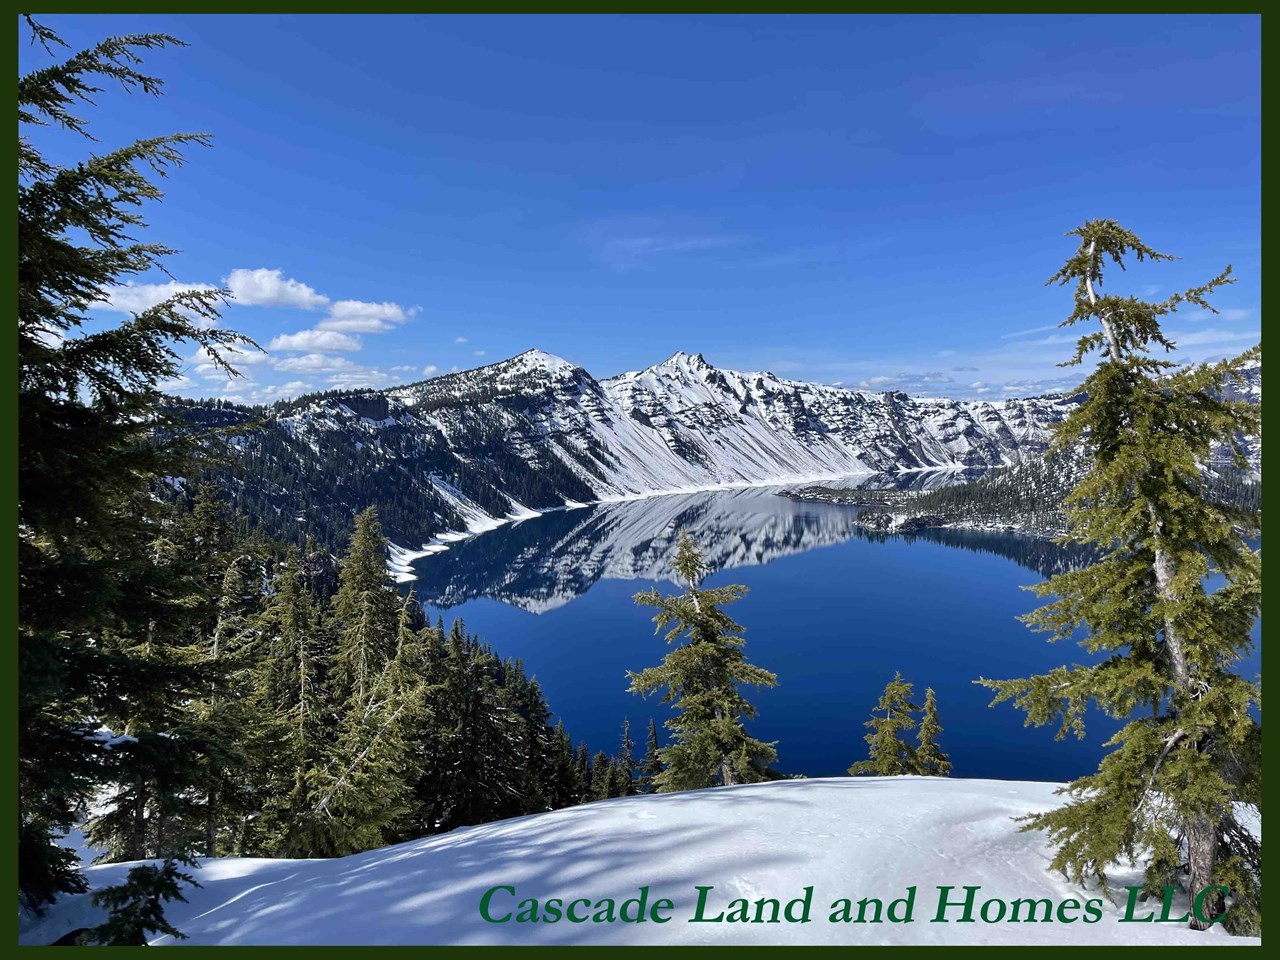 crater lake national park is only about 45 miles away, and is oregon’s only national park! crater lake is fed from rain and snow melt and is amazingly clear. at 1,949 feet deep, it is the deepest lake in the nation and is absolutely breathtaking! the nearby cascade mountains offer unlimited year-round outdoor activities including skiing and snowboarding at the willamette pass or north to ski mt. bachelor or south to mt. shasta, ca. in the winter.